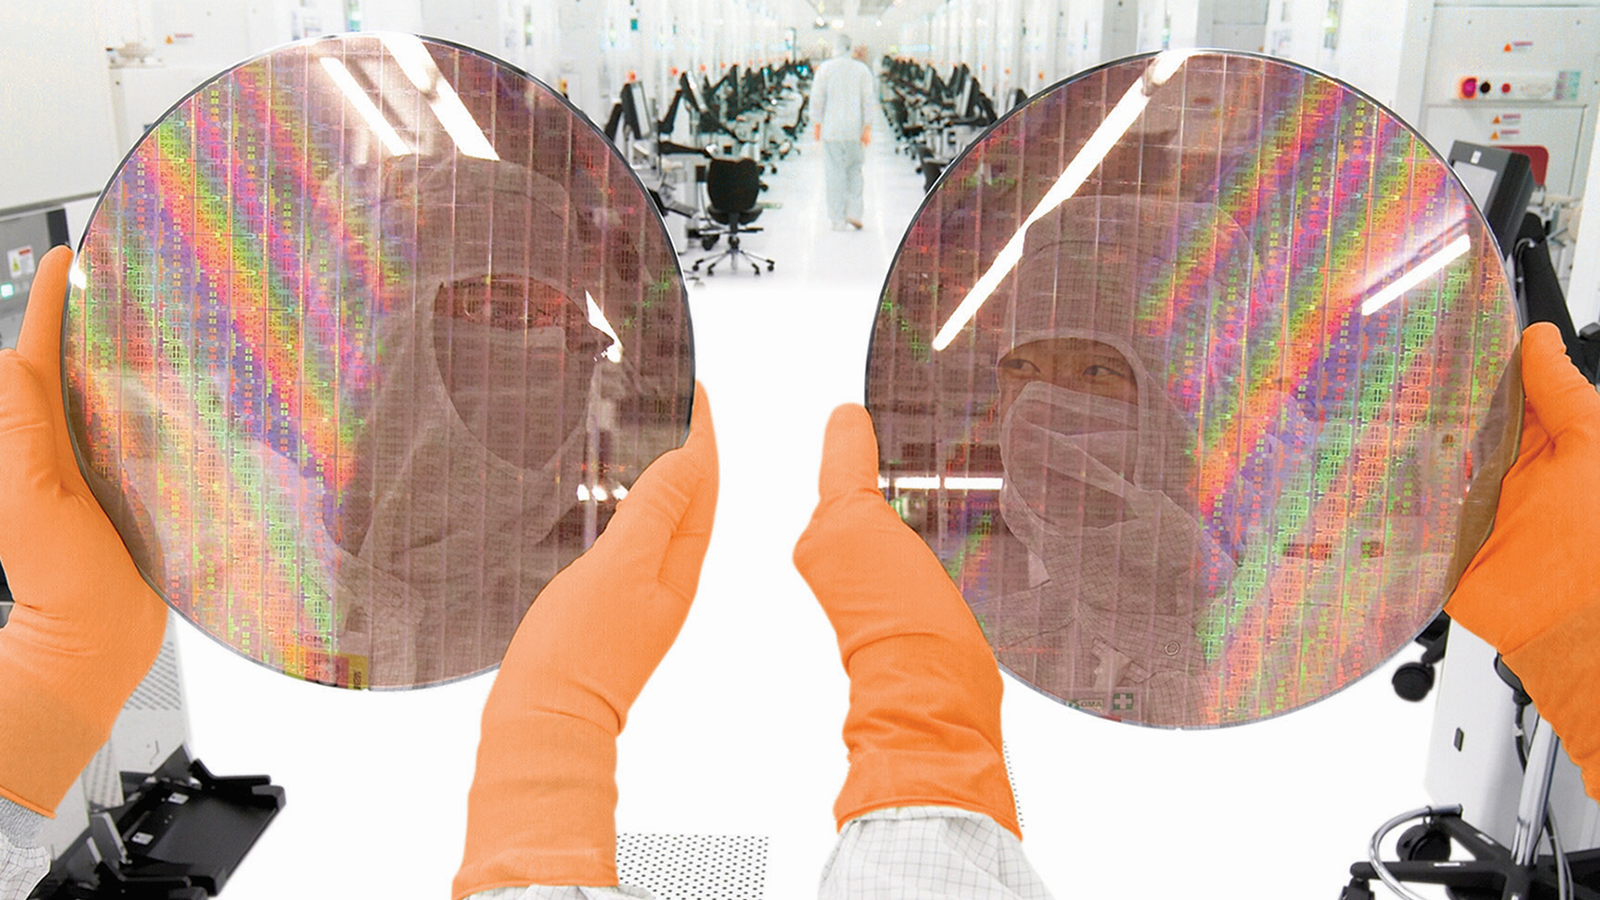 globalfoundries-owner-eyes-$20-billion-valuation-for-ipo